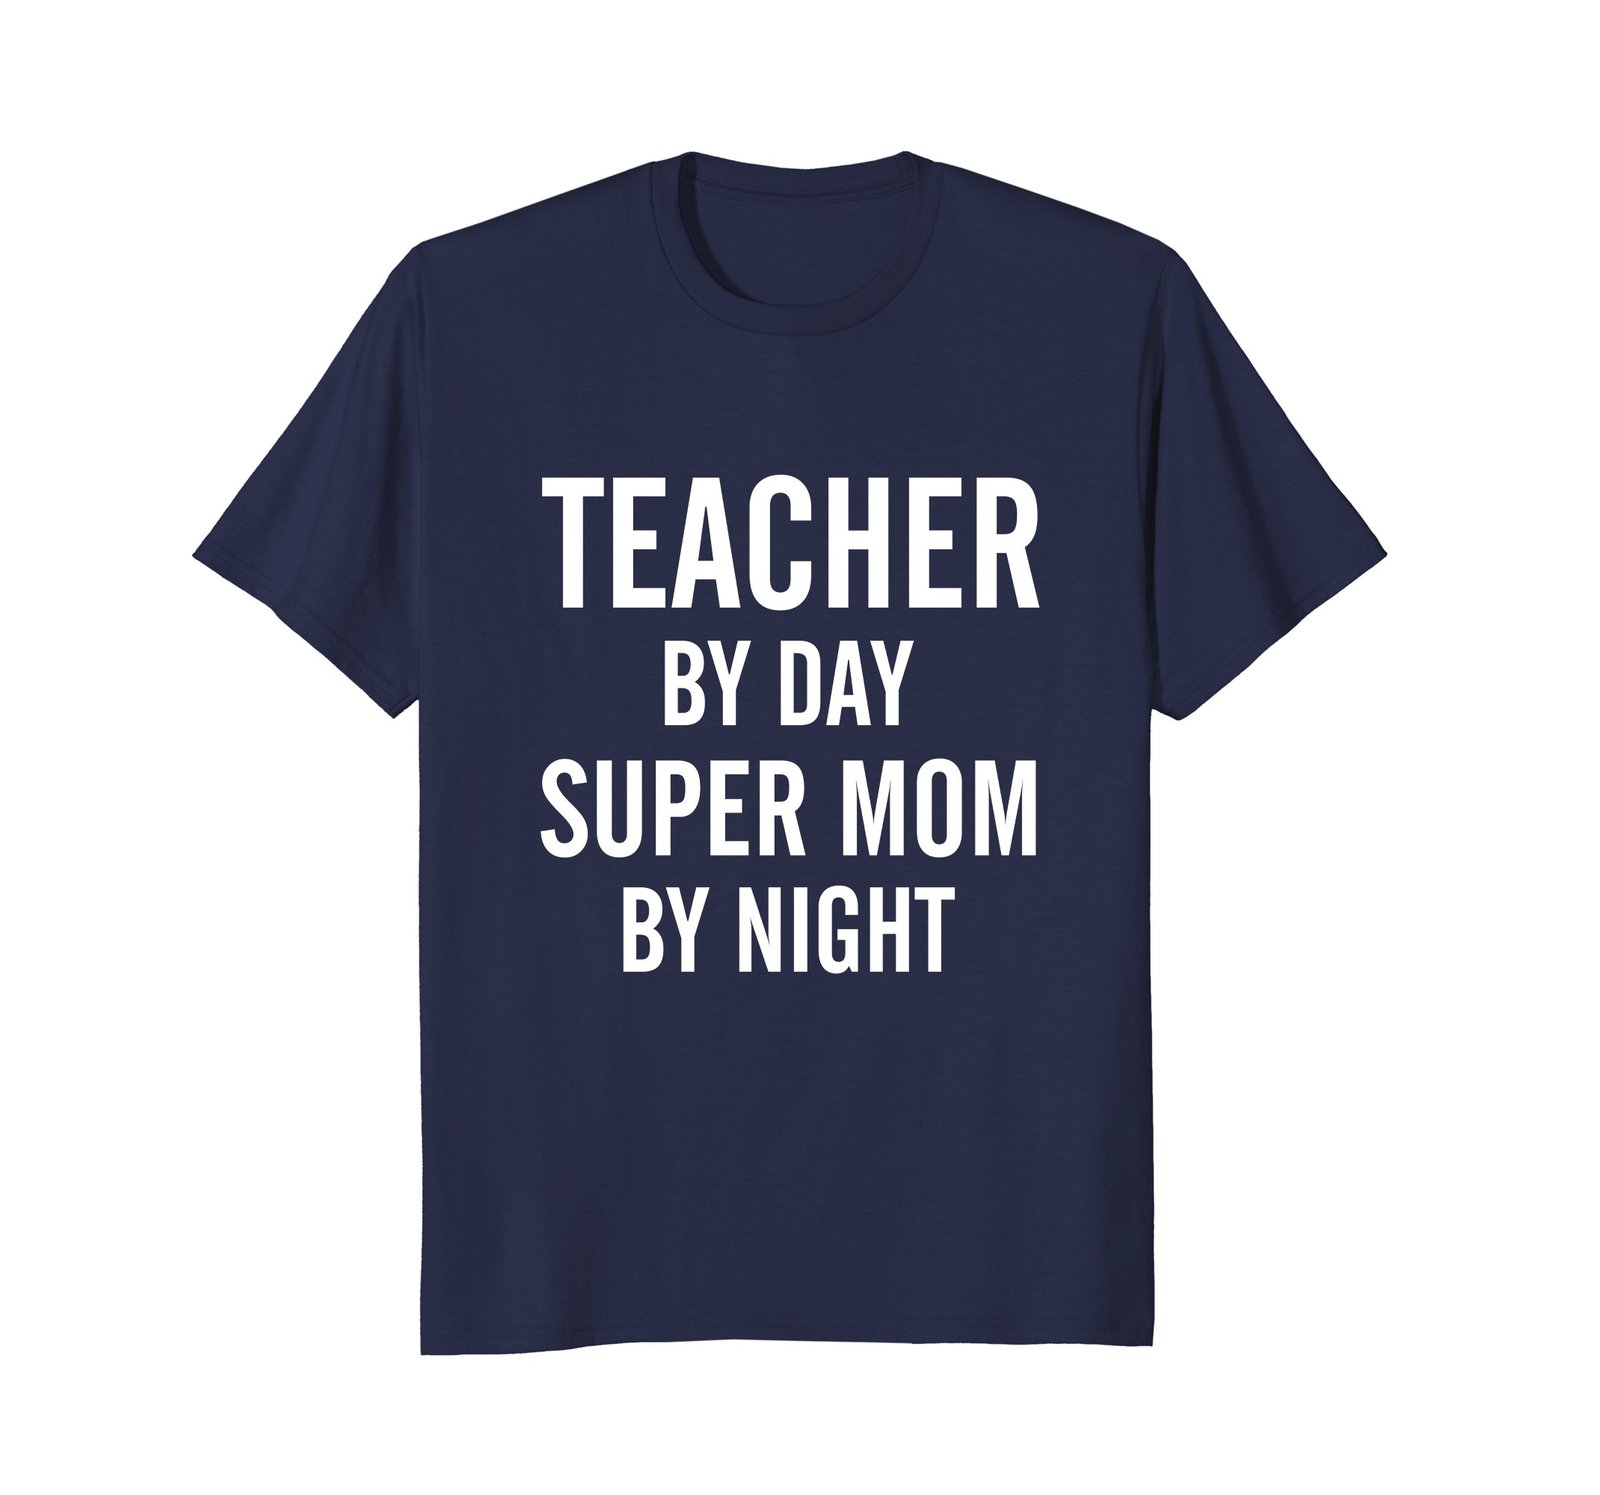 Funny Shirts - Teacher By Day Super Mom By Night Shirt Mother's Day Gift Men